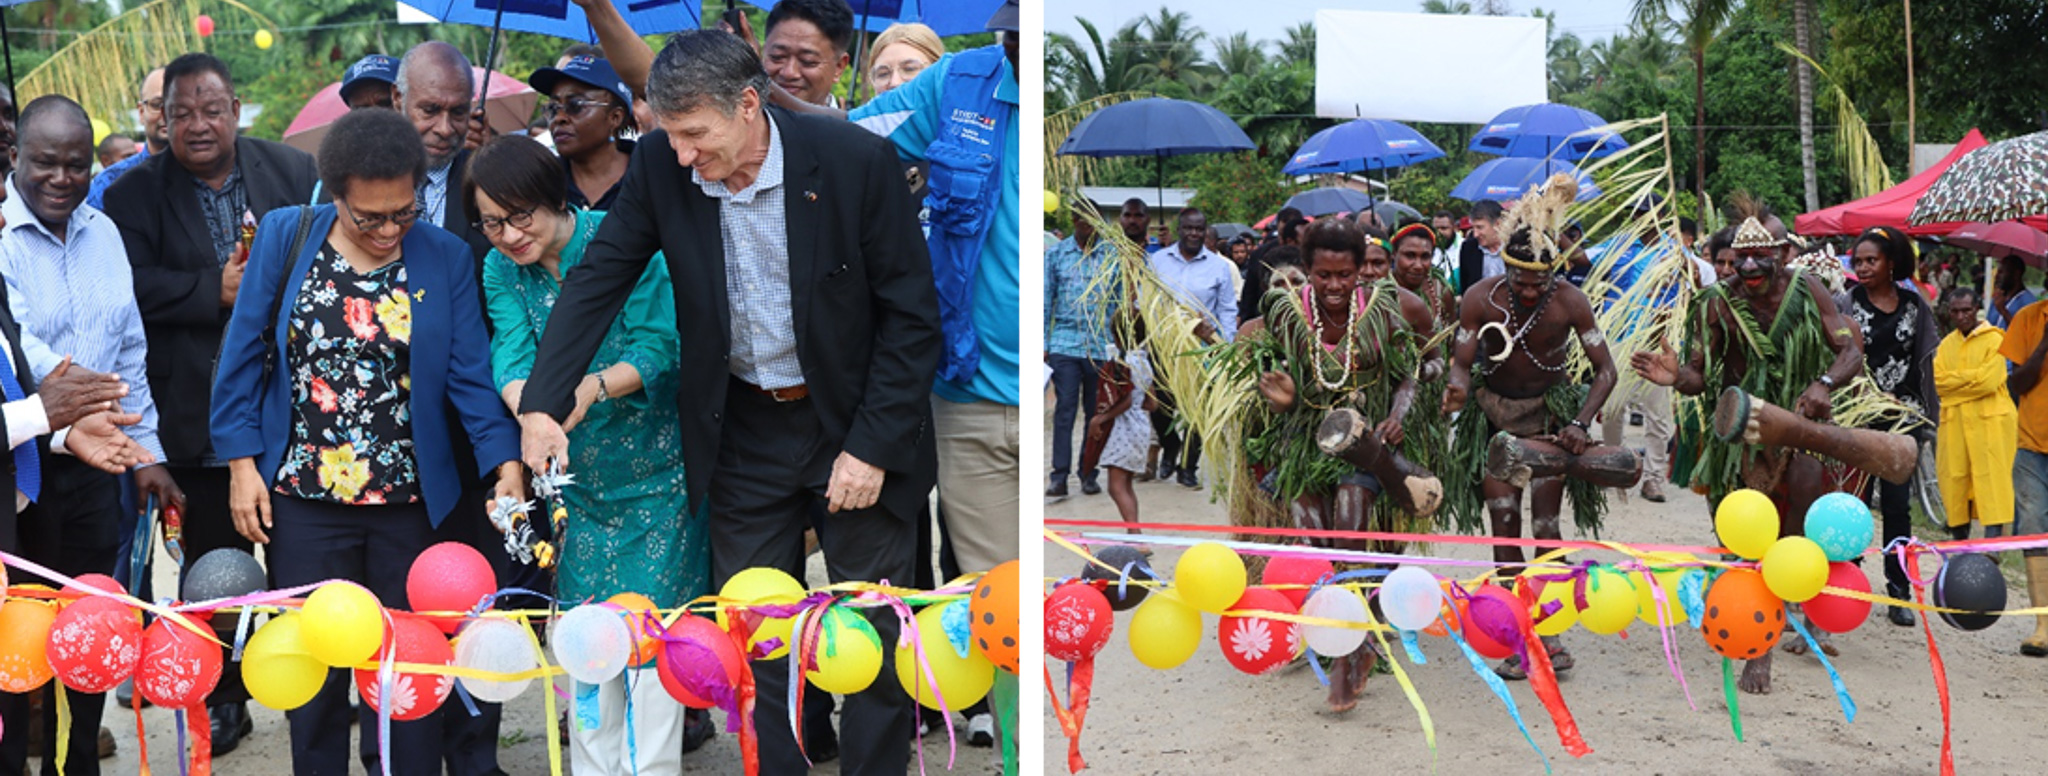 High-level officials from the PNG Government, UN, and EU are cutting ribbon, officially inaugurating the rehabilitated Yawasoro-Niewanjie road in East Sepik. ©FAO-STREIT